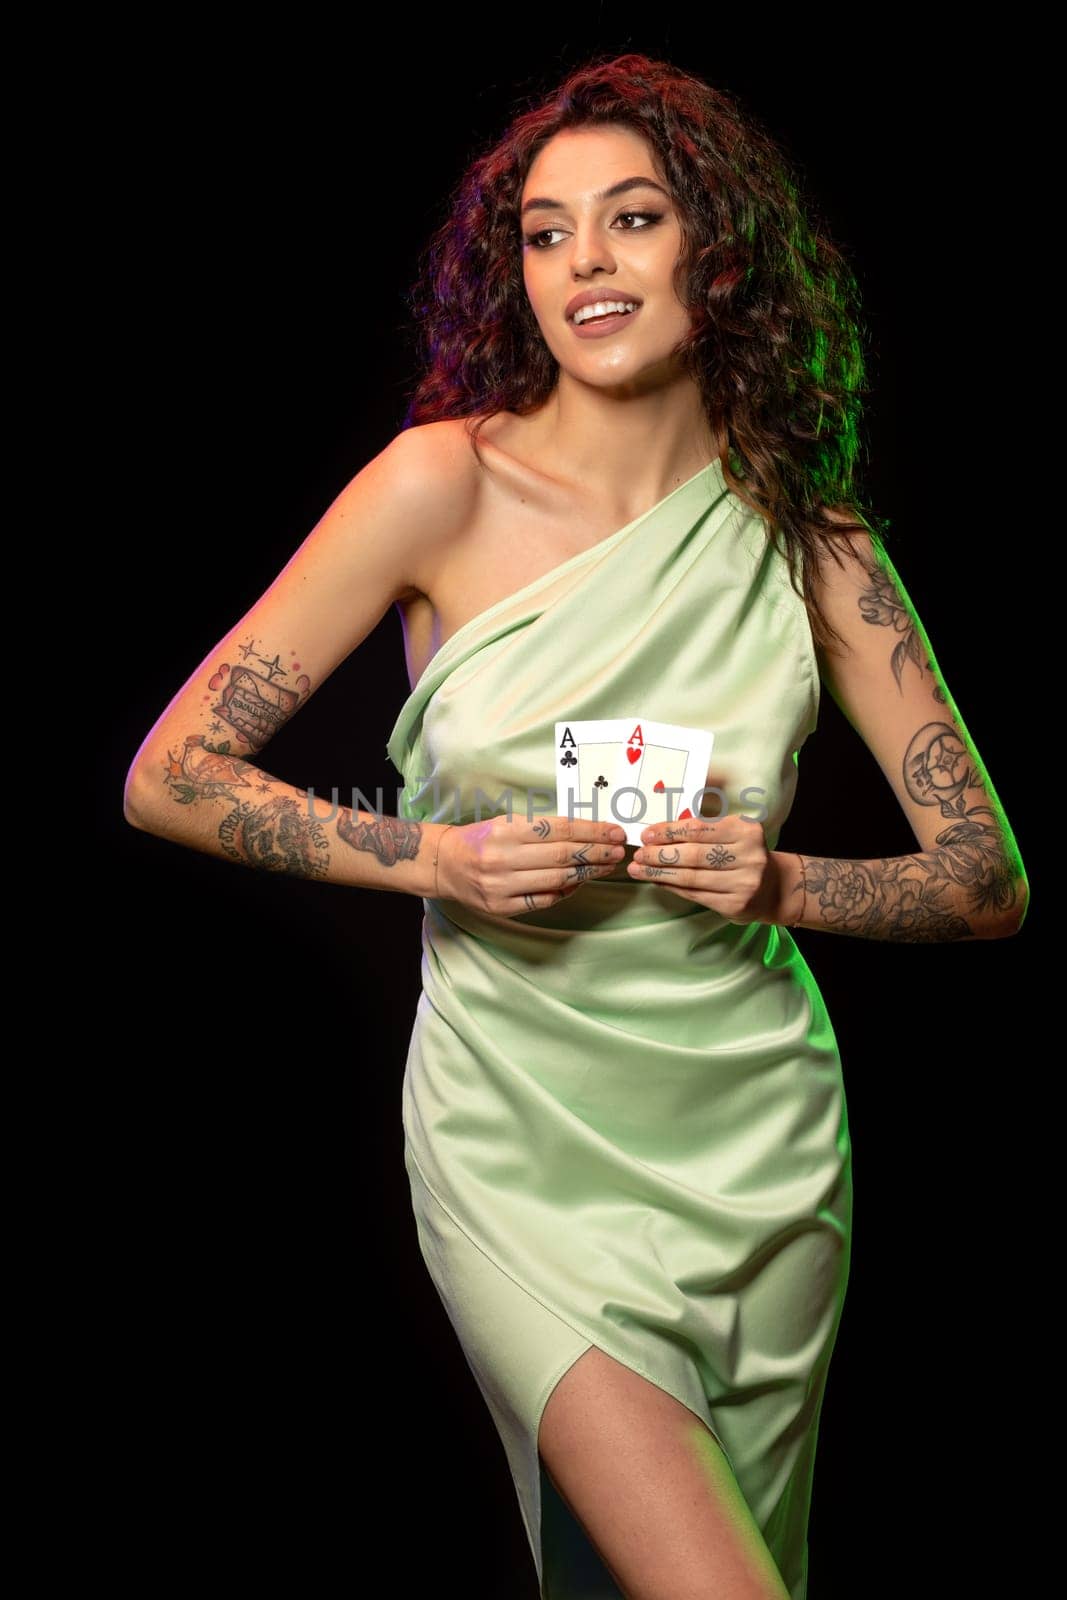 Smiling gambling young woman holding winning set of two aces by nazarovsergey